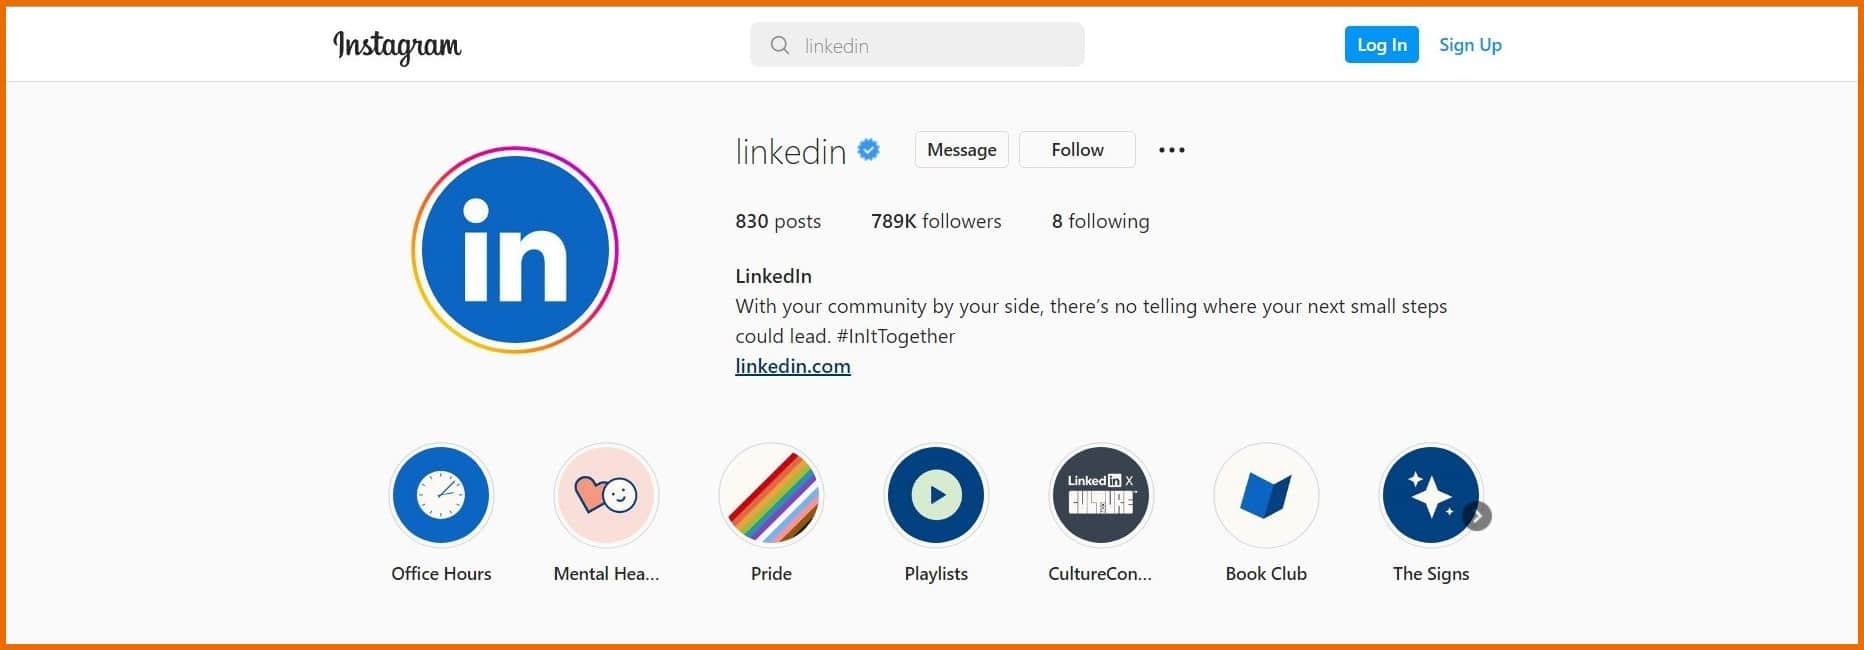 Business profile example on Instagram